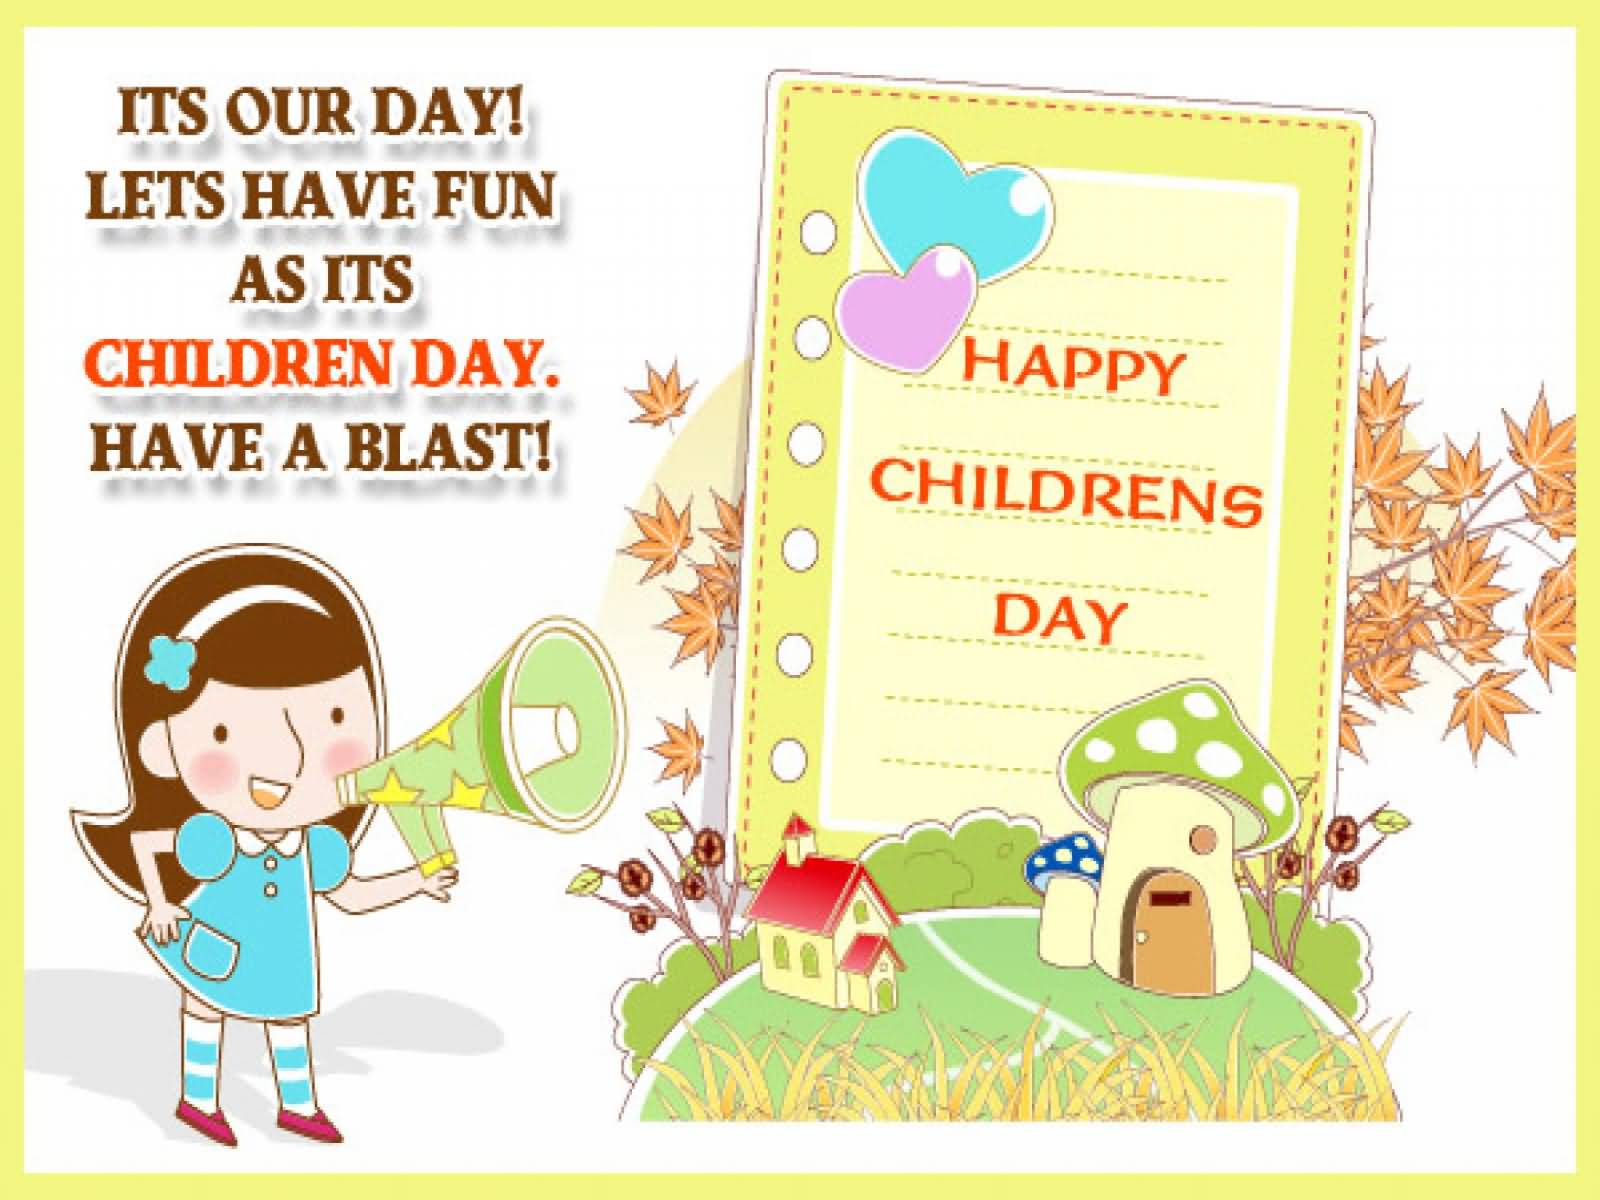 Its Our Day Lets Have Fun As Its Children's Day Have A Blast. Happy Children's Day